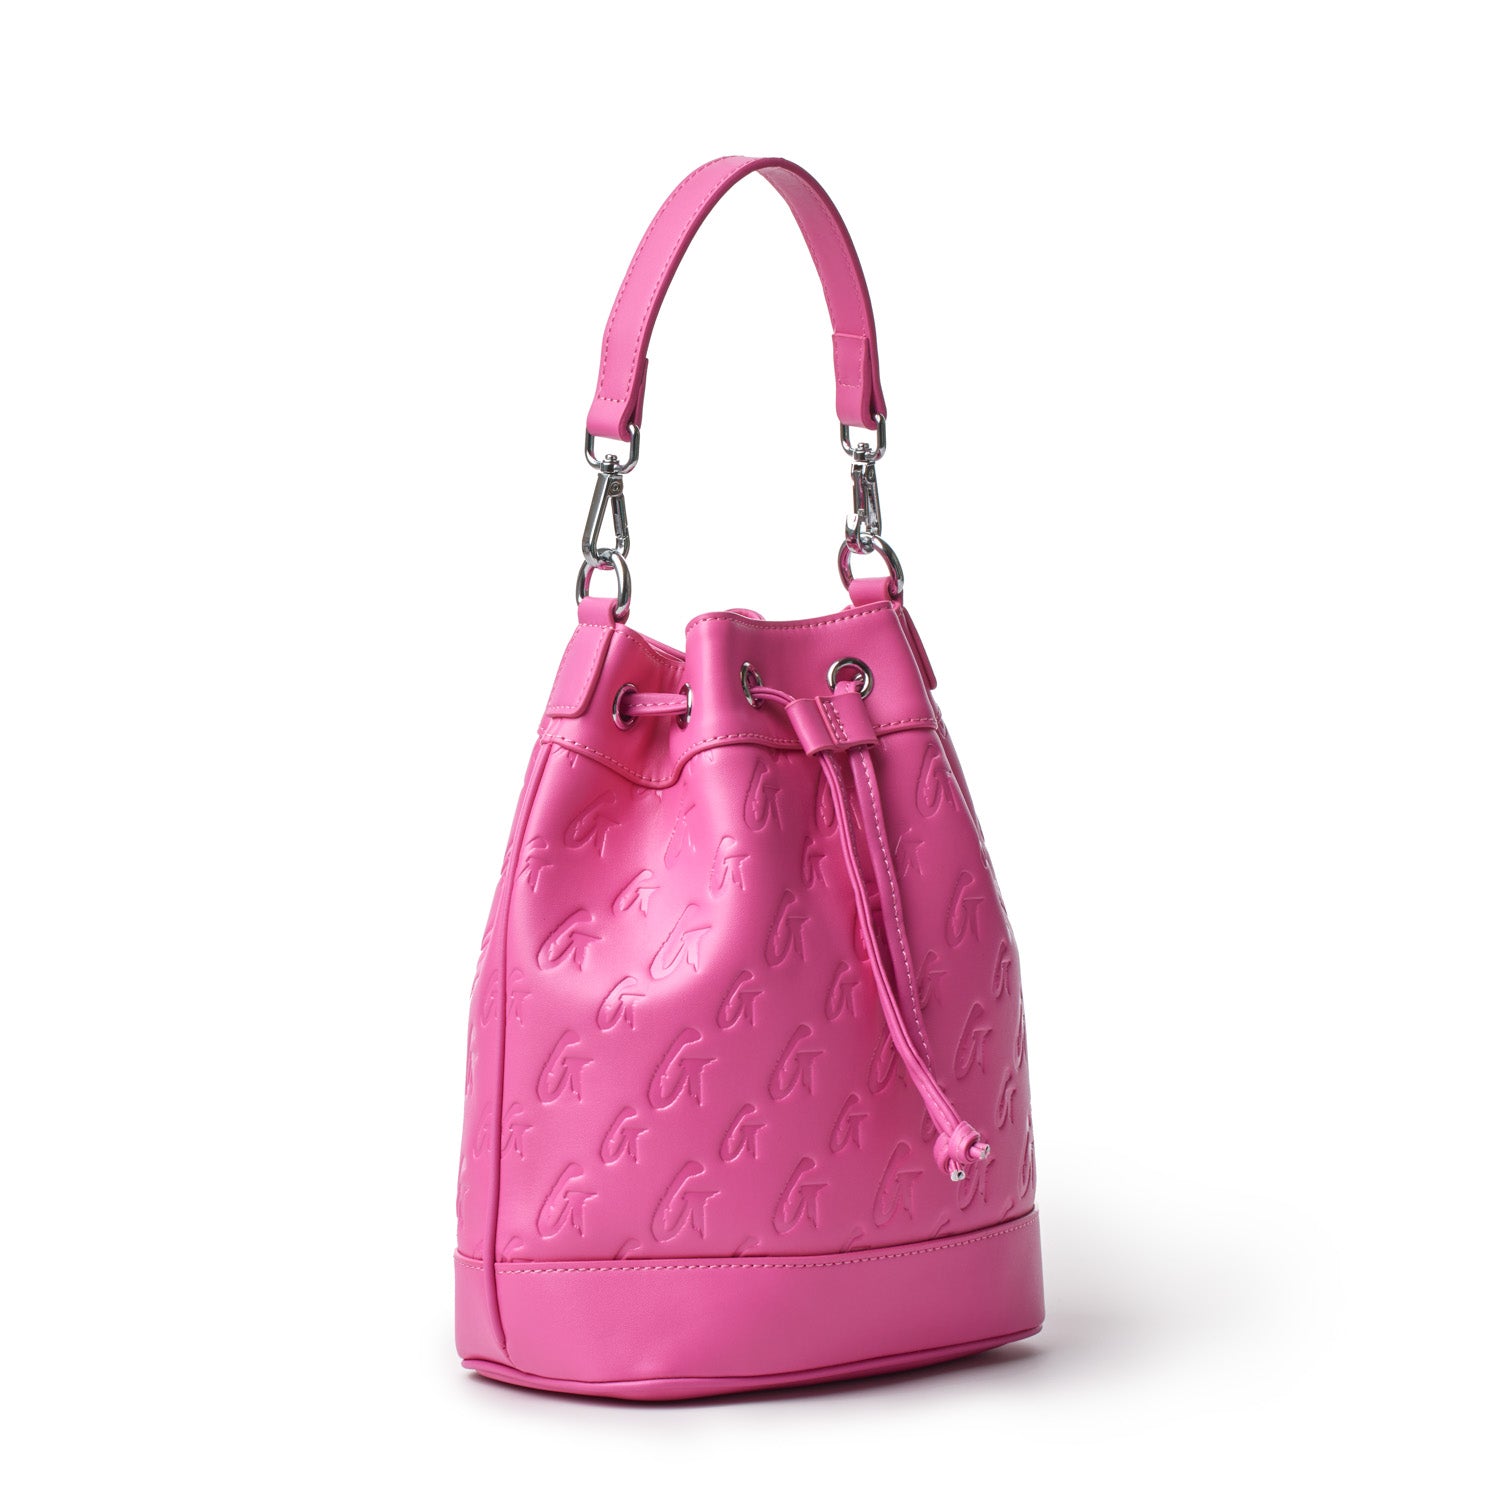 WHATS IN MY GLAMAHOLIC LIFESTYLE BUCKET BAGS AND FANNY PACK? 